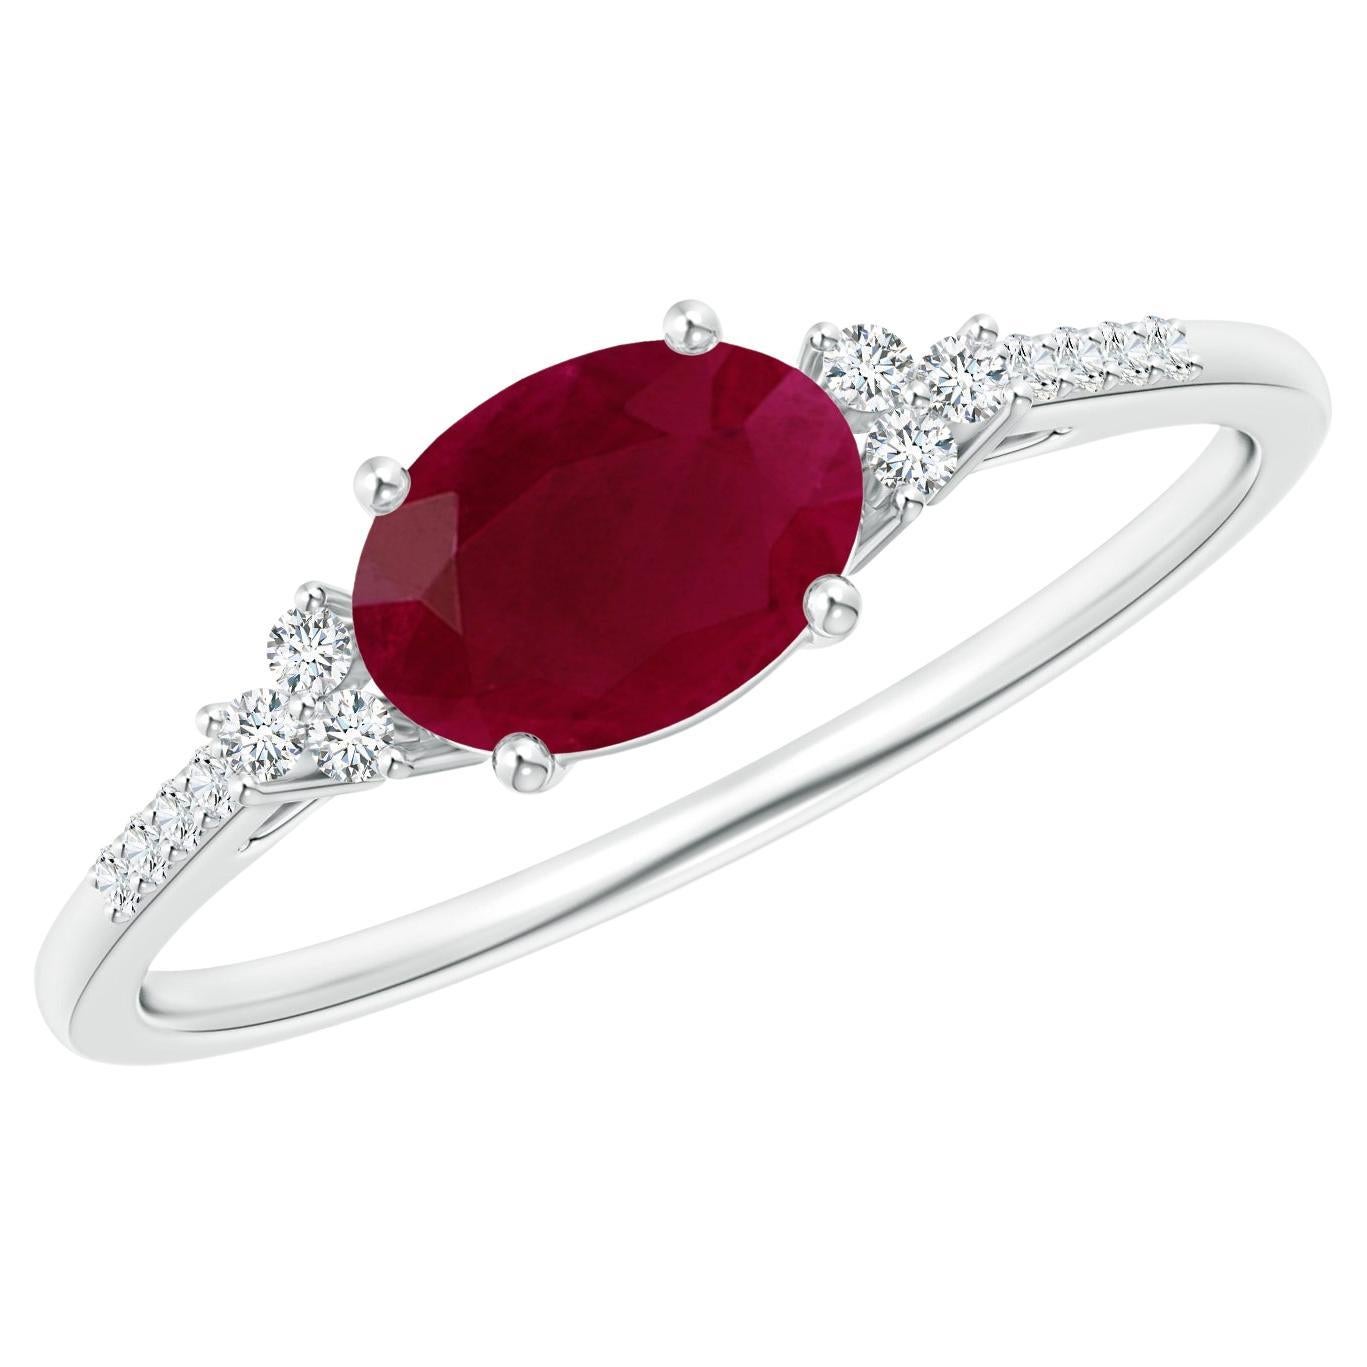 ANGARA 1ct Ruby Solitaire Ring with Trio Diamond Accents in Platinum